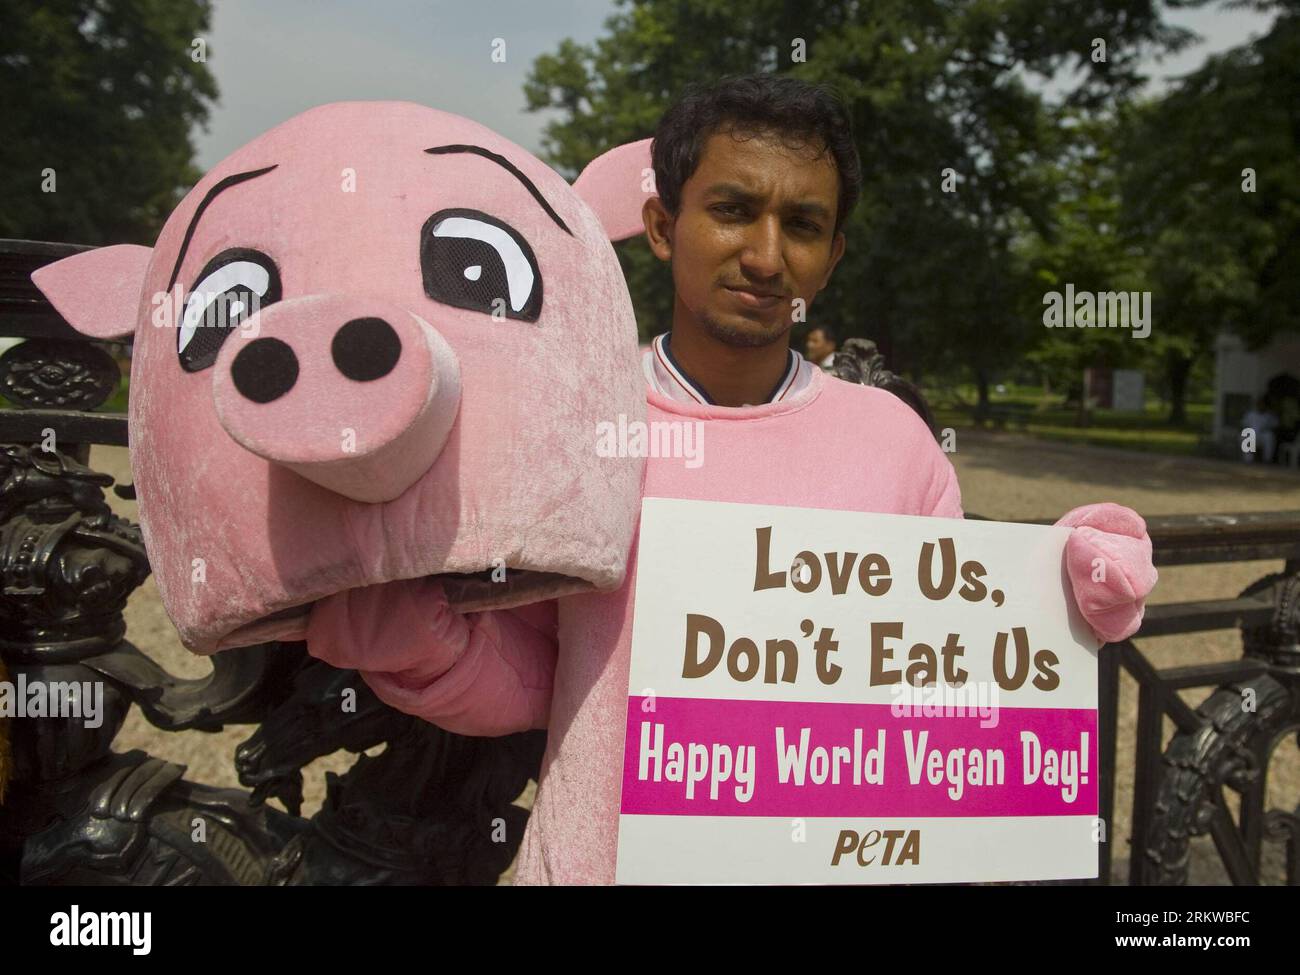 Bildnummer: 58657296  Datum: 01.11.2012  Copyright: imago/Xinhua (121101) -- CALCUTTA, Nov. 1, 2012 (Xinhua) -- An Indian activist of People for Ethical Treatment of Animals (PETA) dressed as pig demonstrates against the consumption of meat, dairy and other products derived from animals on World Vegan Day in Calcutta, India, Nov. 1, 2012. (Xinhua/Tumpa Mondal)(zyw) INDIA-CALCUTTA-WORLD VEGAN DAY PUBLICATIONxNOTxINxCHN Gesellschaft Demo Tierschutz Vegan Veganer Peta xas x0x 2012 quer premiumd      58657296 Date 01 11 2012 Copyright Imago XINHUA  Calcutta Nov 1 2012 XINHUA to Indian Activist of Stock Photo